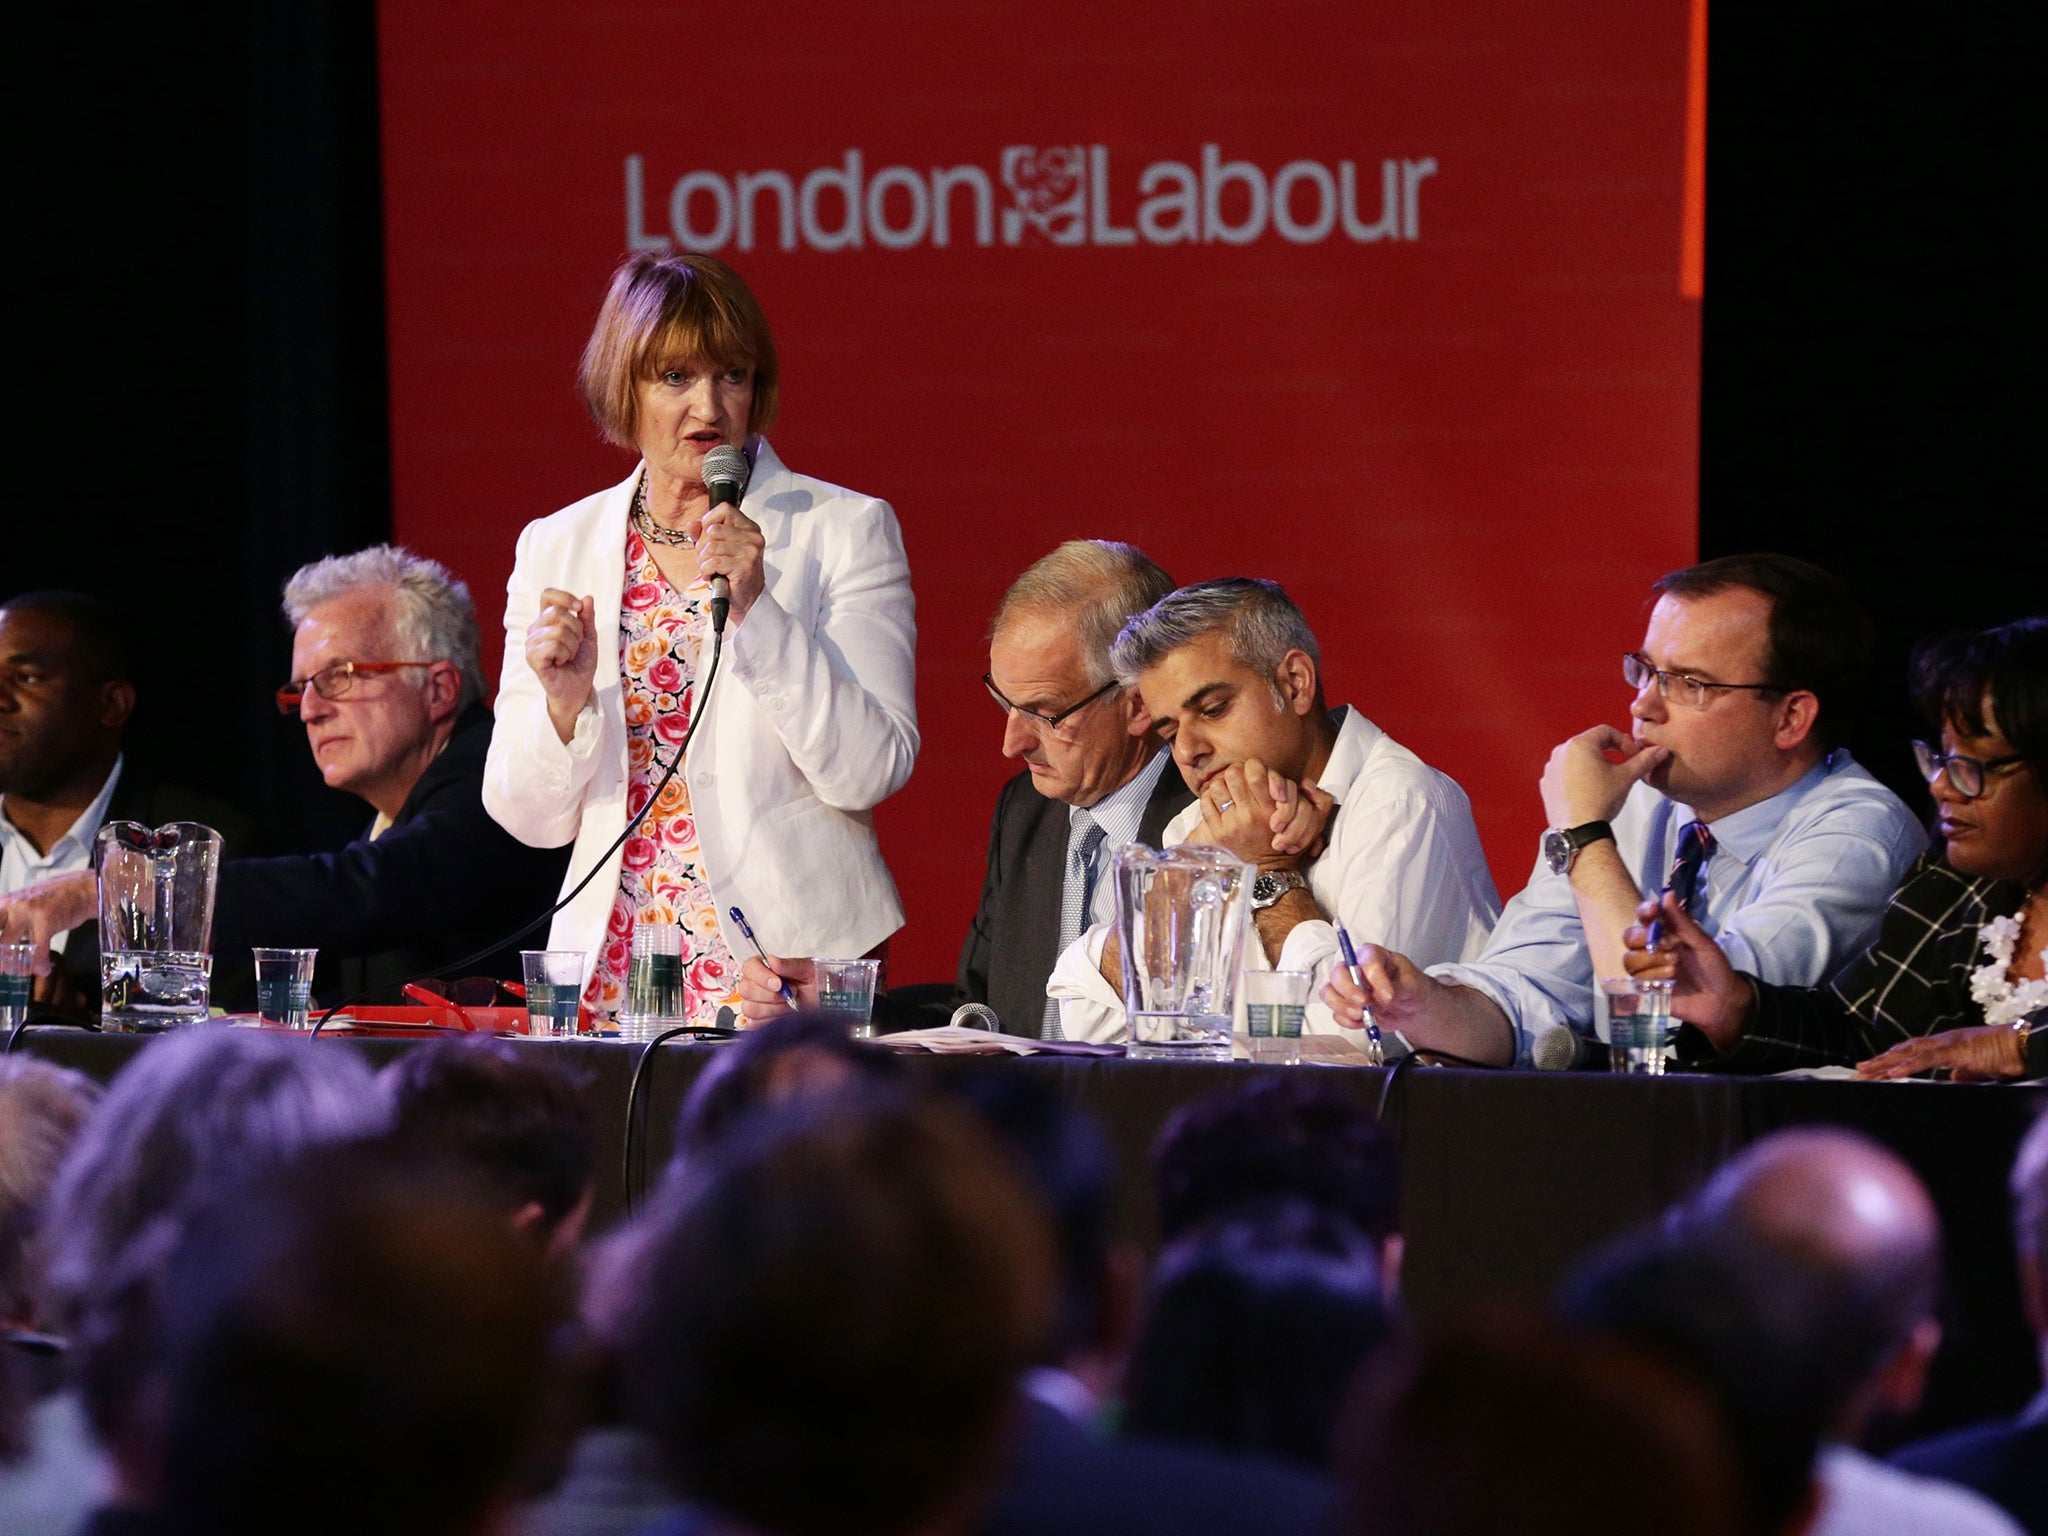 Tessa Jowell speaking, as (left to right) David Lammy, Christian Wolmar, chair of the event Robert Evans, Sadiq Khan, Gareth Thomas and Diane Abbott listen, during the London Labour hustings for mayoral candidacy, at the Camden Centre in central London